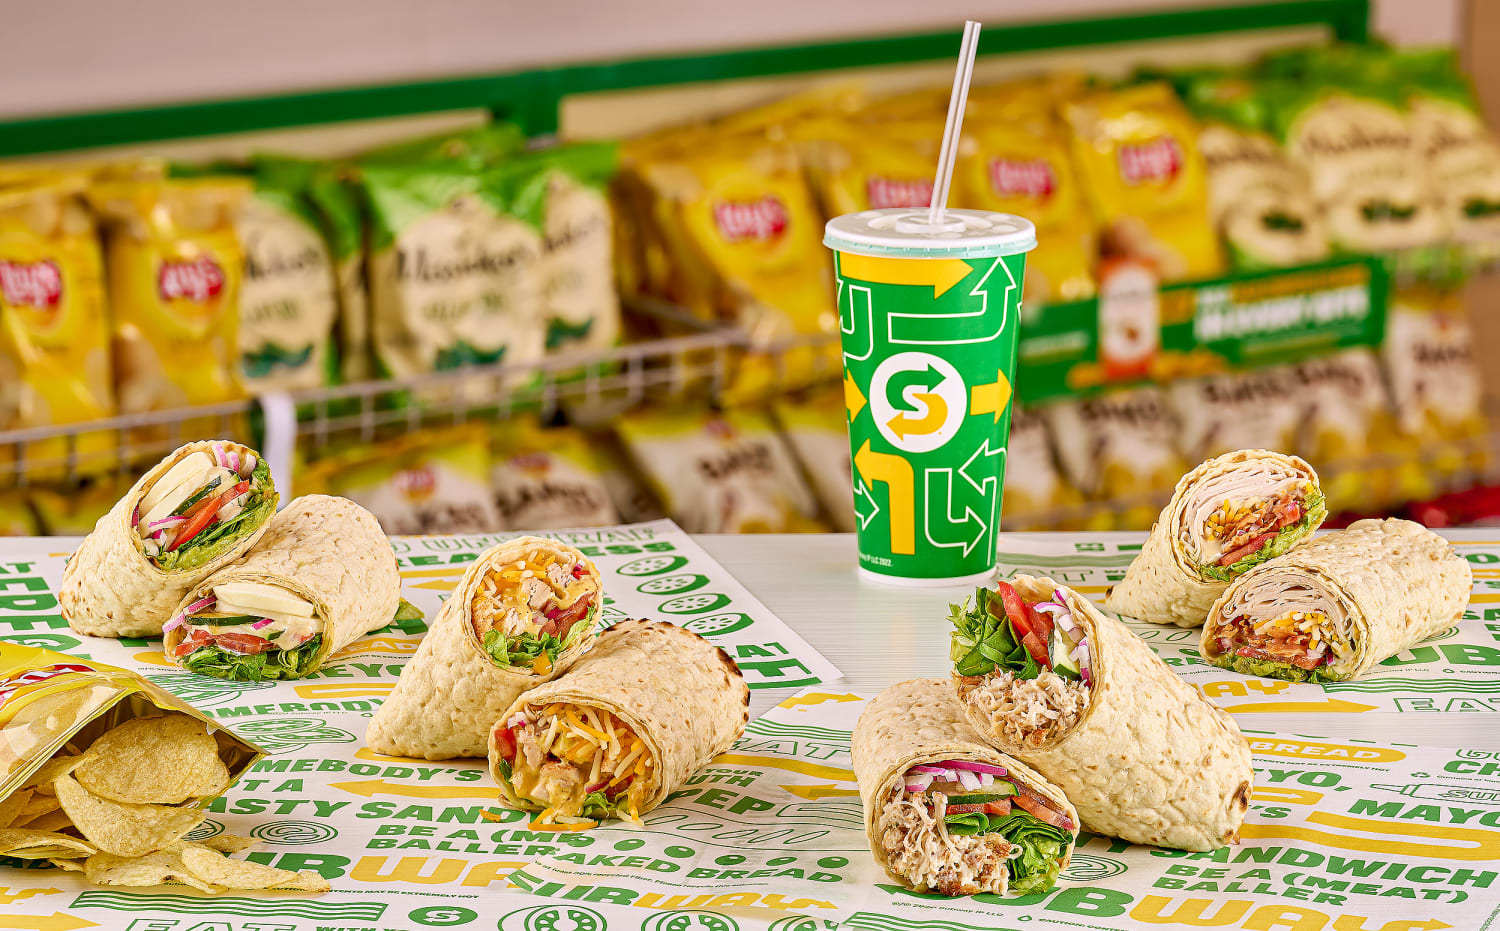 Subway revamps its wrap menu with 4 new items